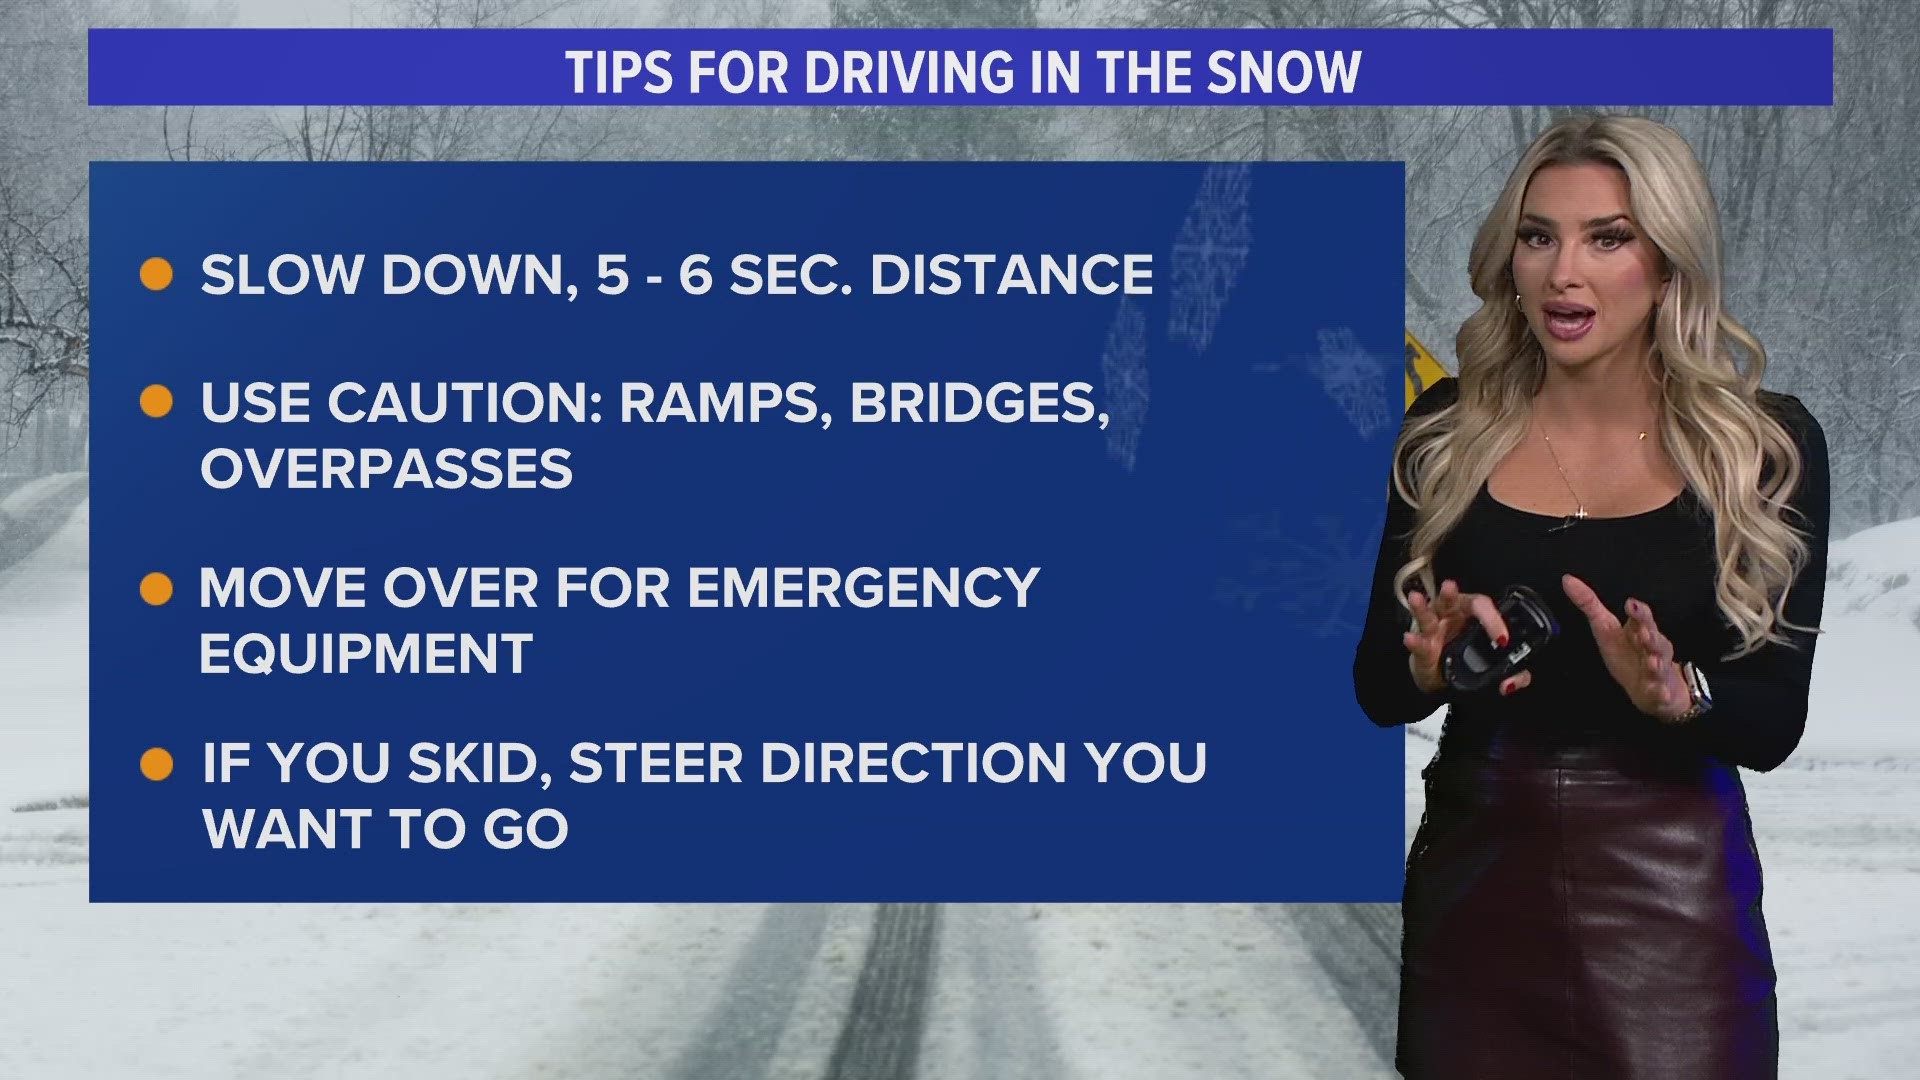 WUSA9's Lindsey Nance provides tips for driving in the snow.